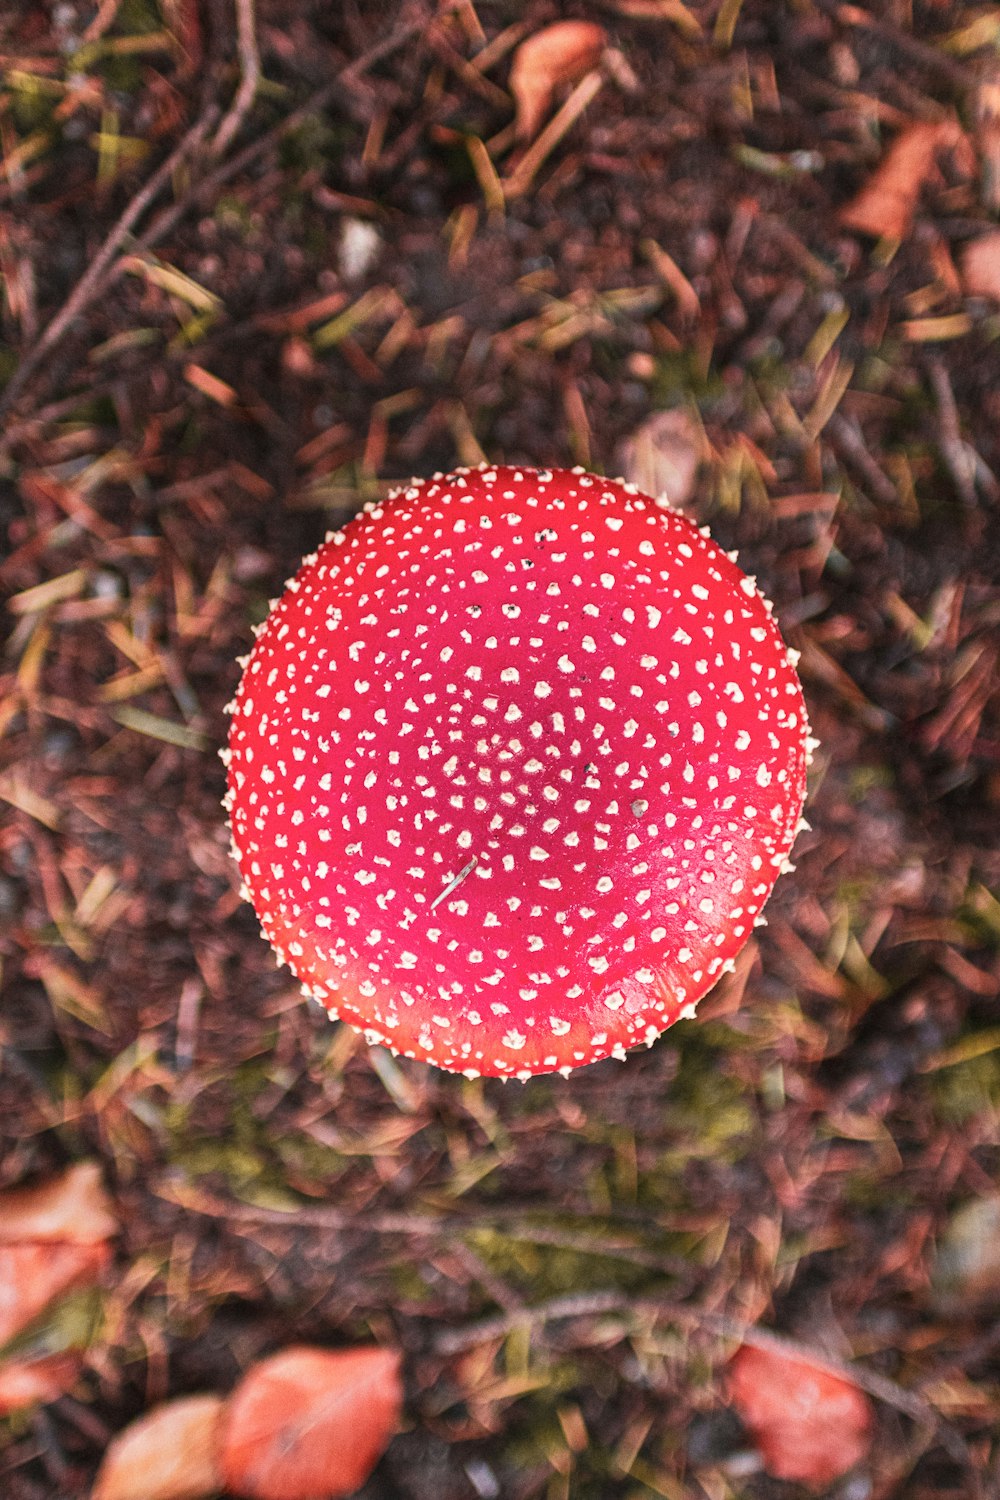 red and white polka dot ball on green grass